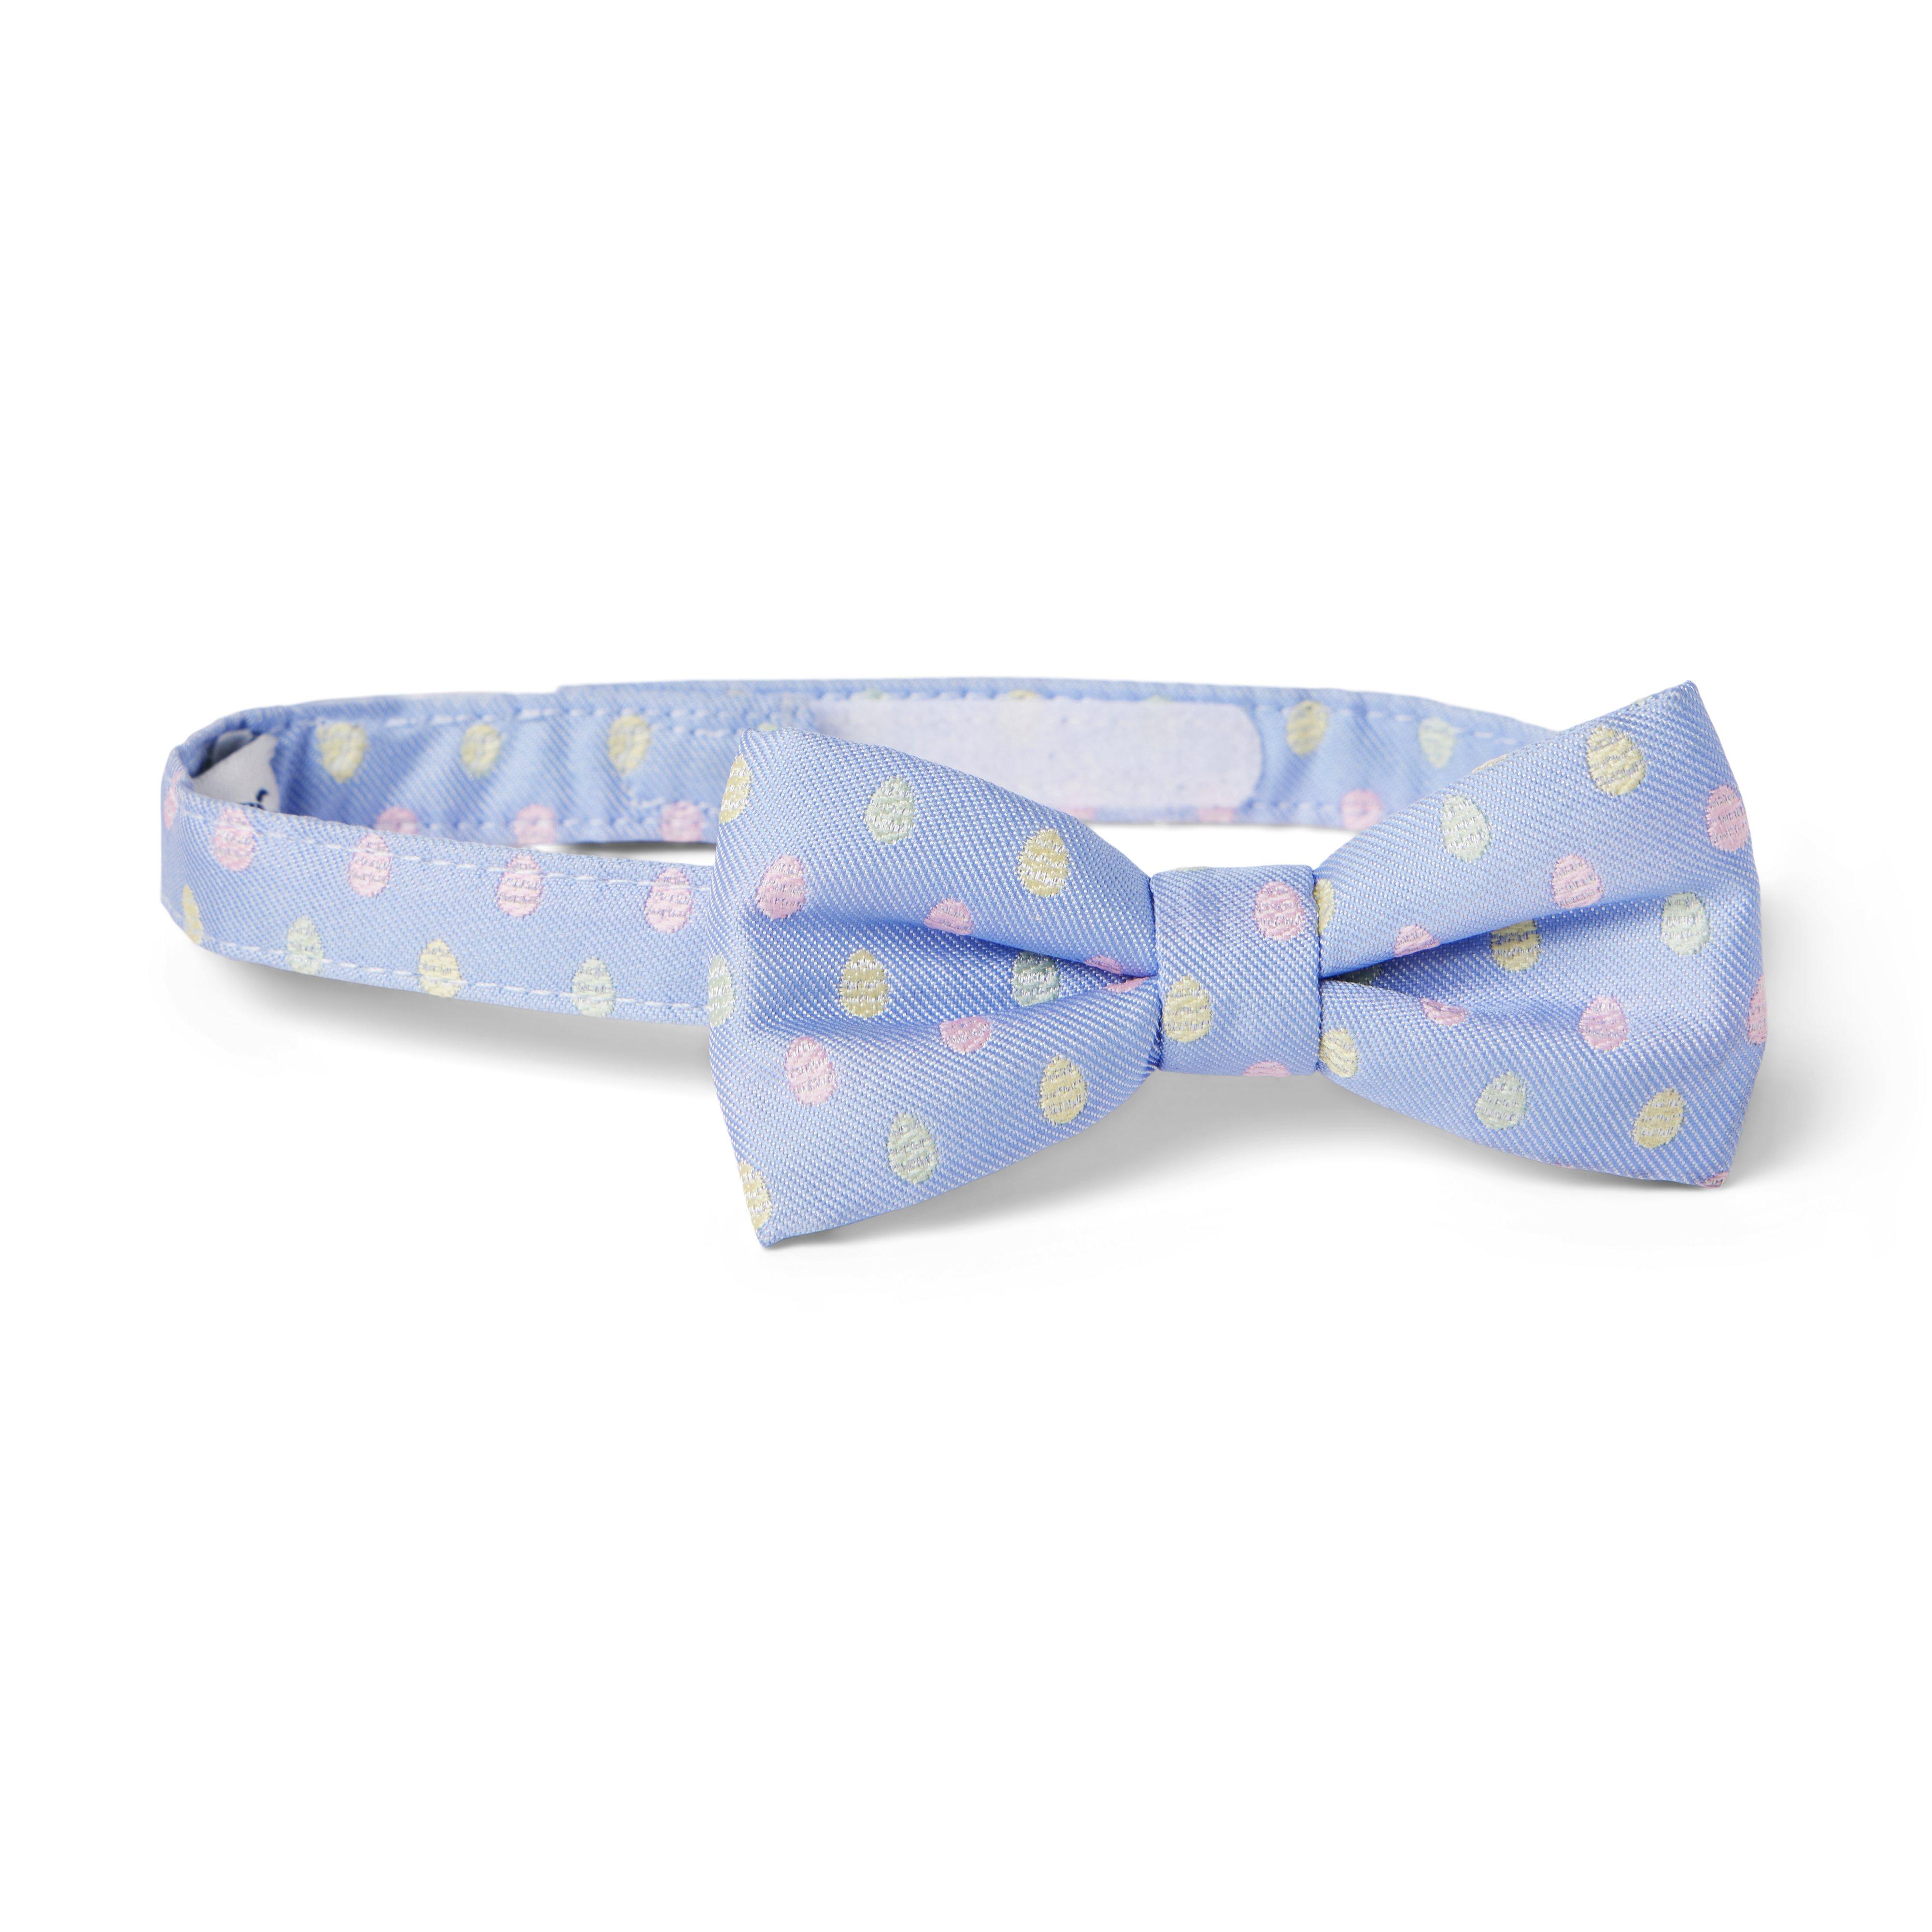 Boy Blue Bunny Easter Egg Easter Egg Bowtie by Janie and Jack